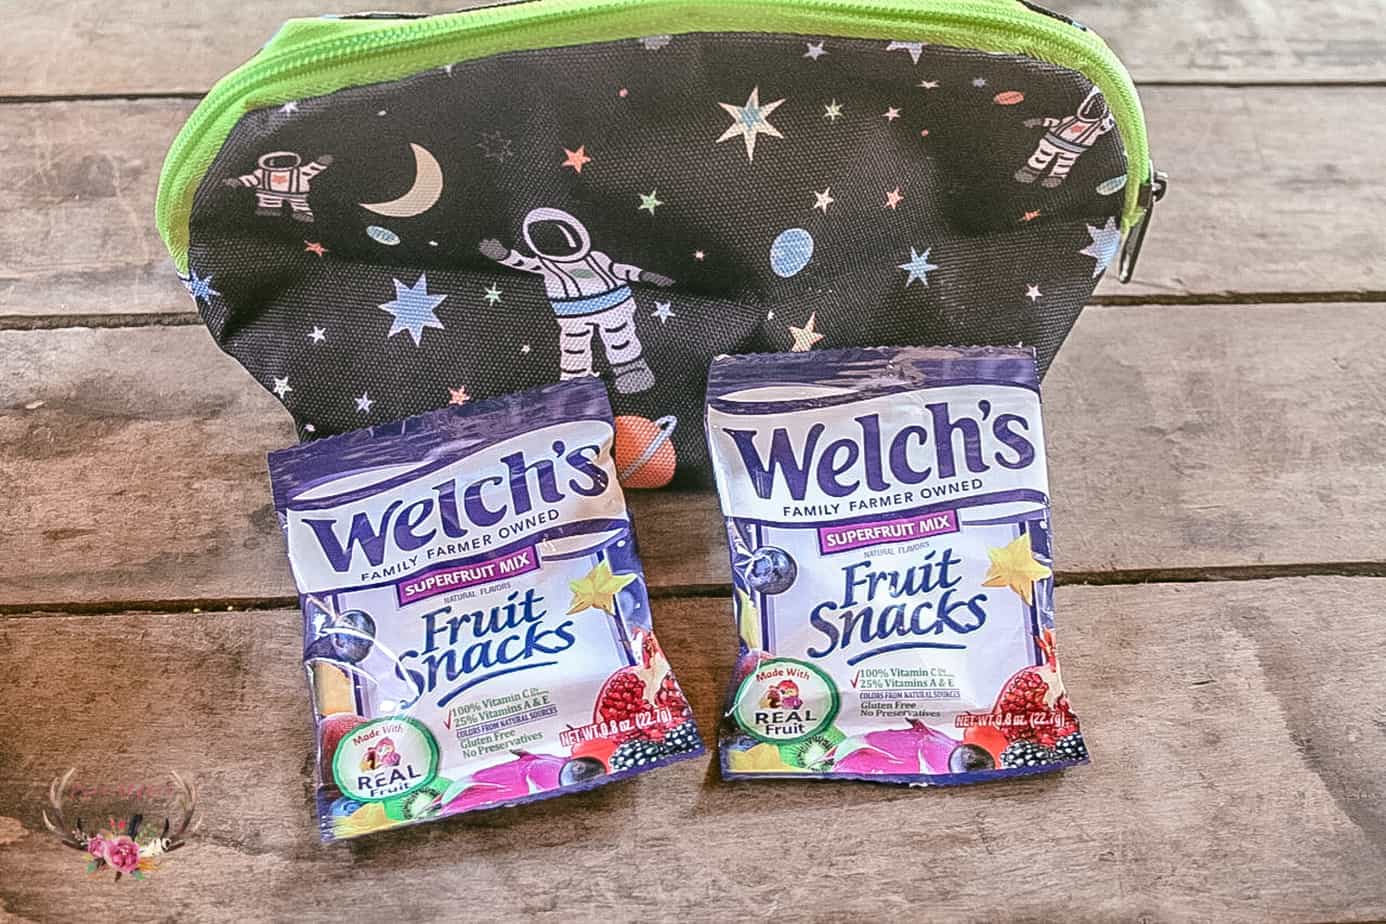 New Welch’s® Fruit Snacks in Superfruit Mix